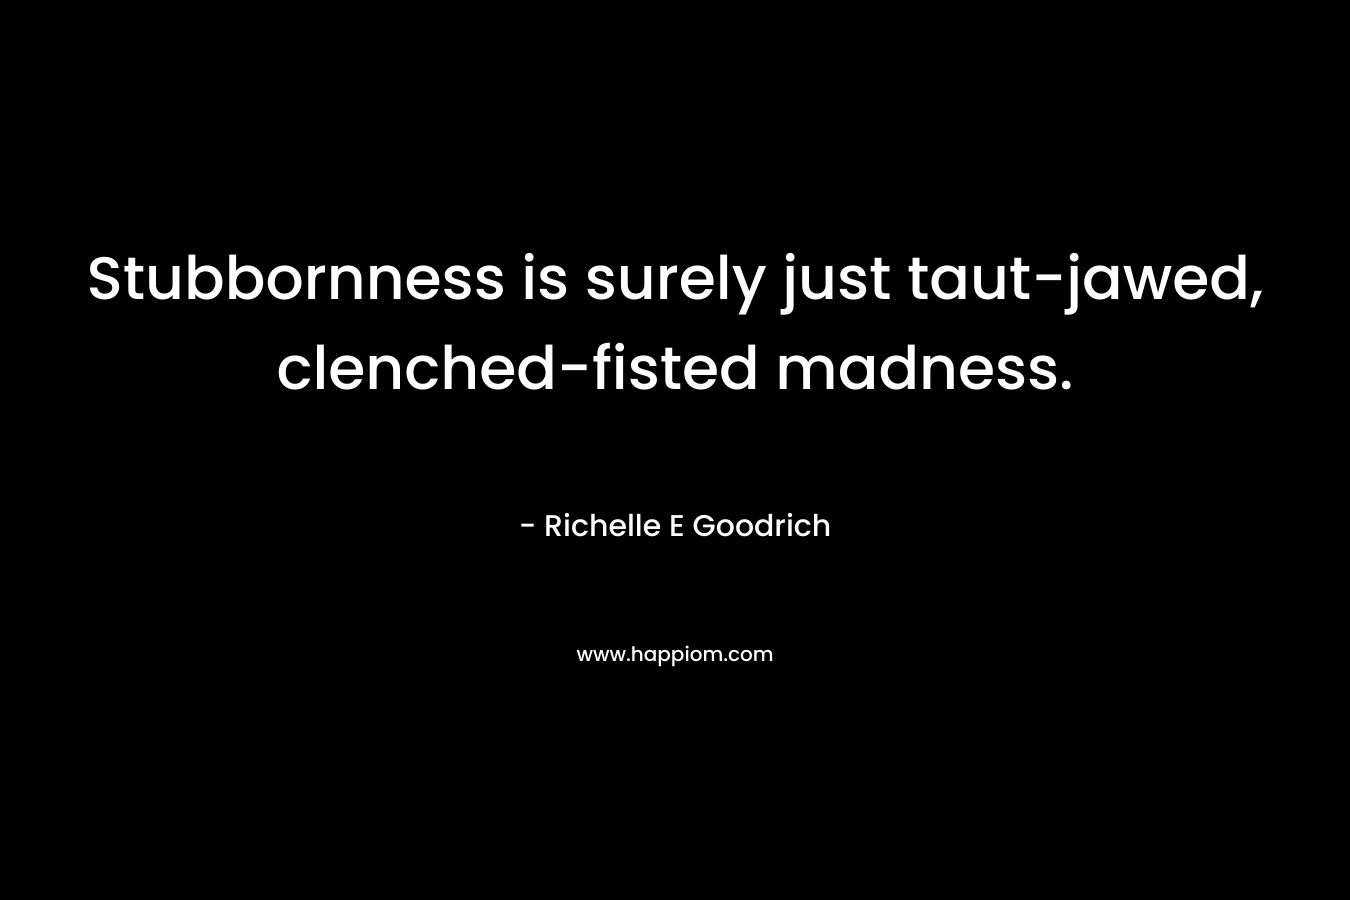 Stubbornness is surely just taut-jawed, clenched-fisted madness. – Richelle E Goodrich